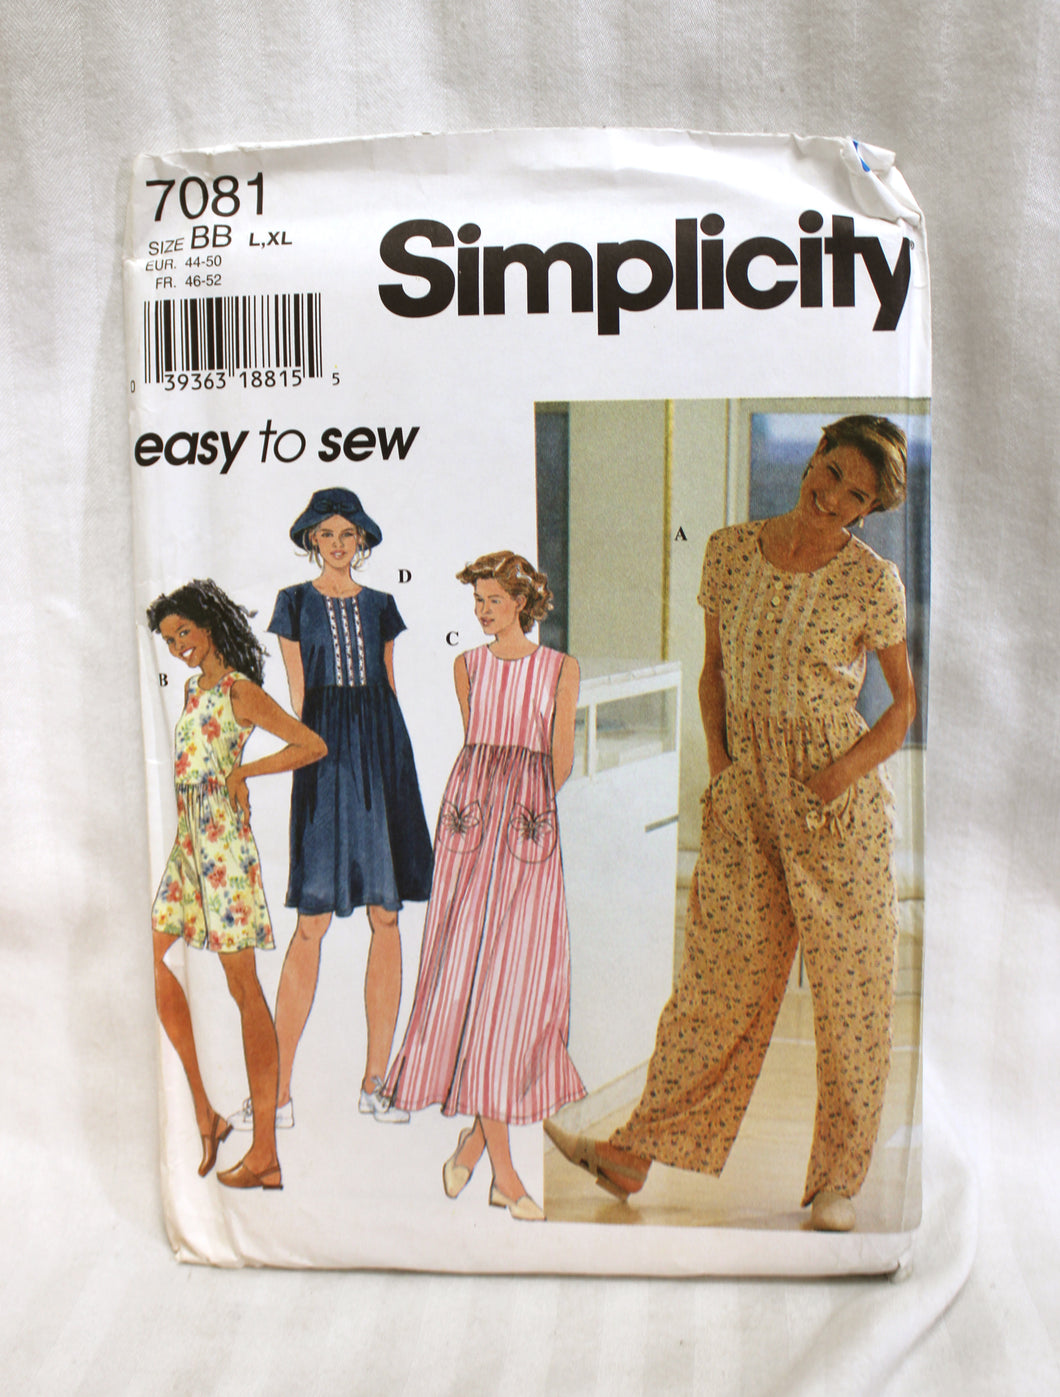 Sewing Pattern -Simplicity - Easy to Sew- 7081 - Misses Romper, Dress and Hat - Size BB L,XL